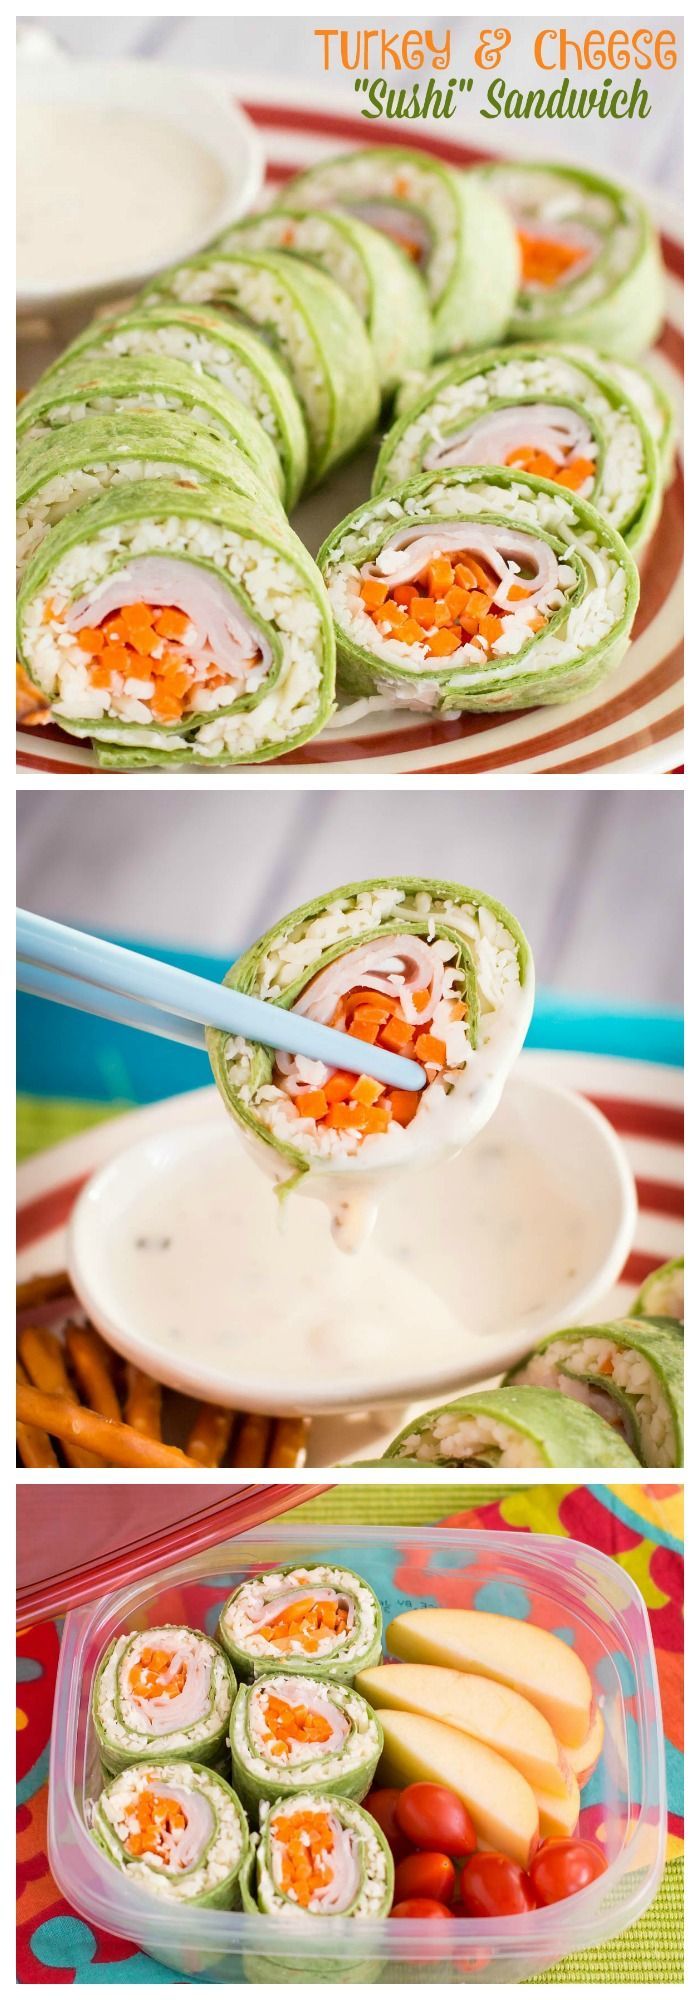 These easy sushi sandwiches made with turkey and cheese are quick to make, and your kids will LOVE them in